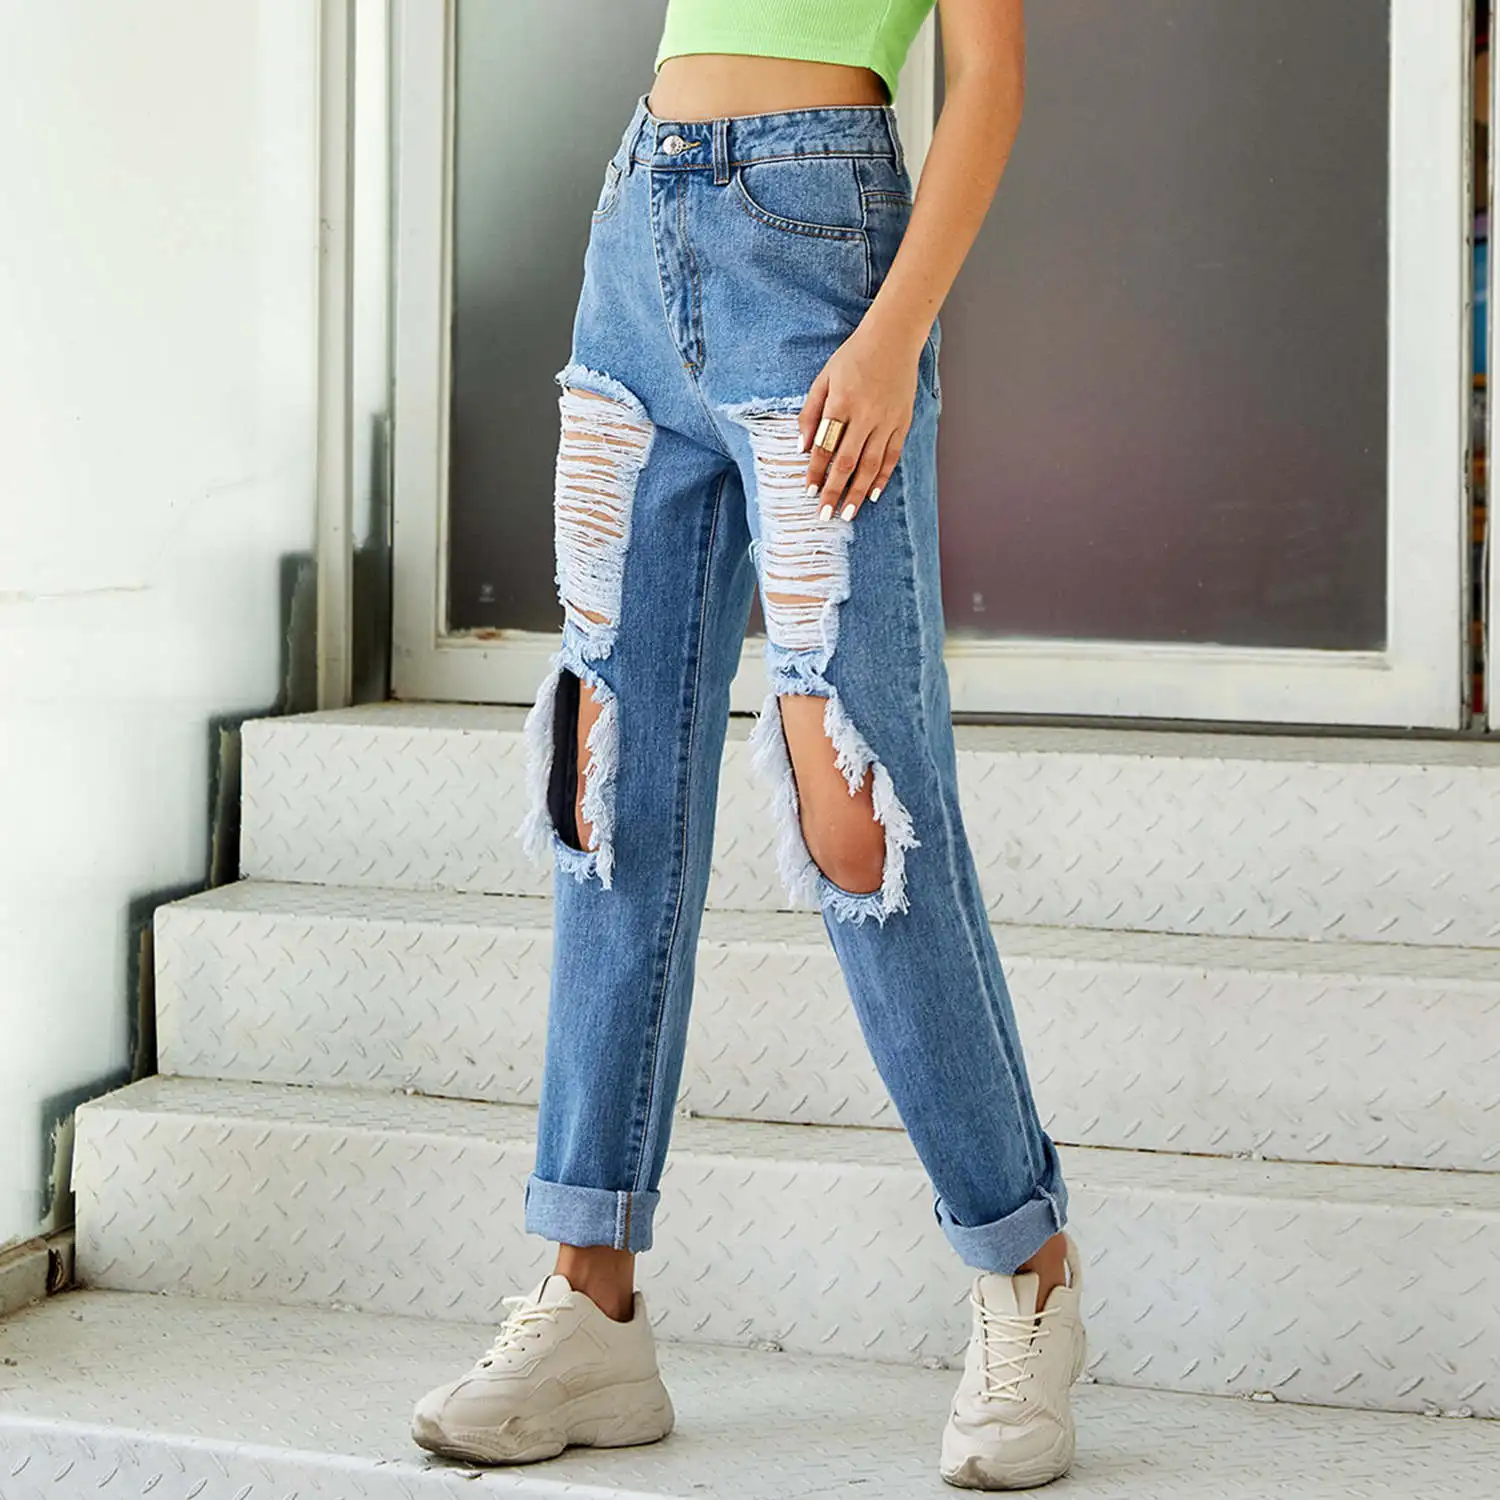 

Summer Autumn Blue Denim High Waisted Jeans Women's Straight Tube Distressed Ripped Denim Pants Comfy Jeans